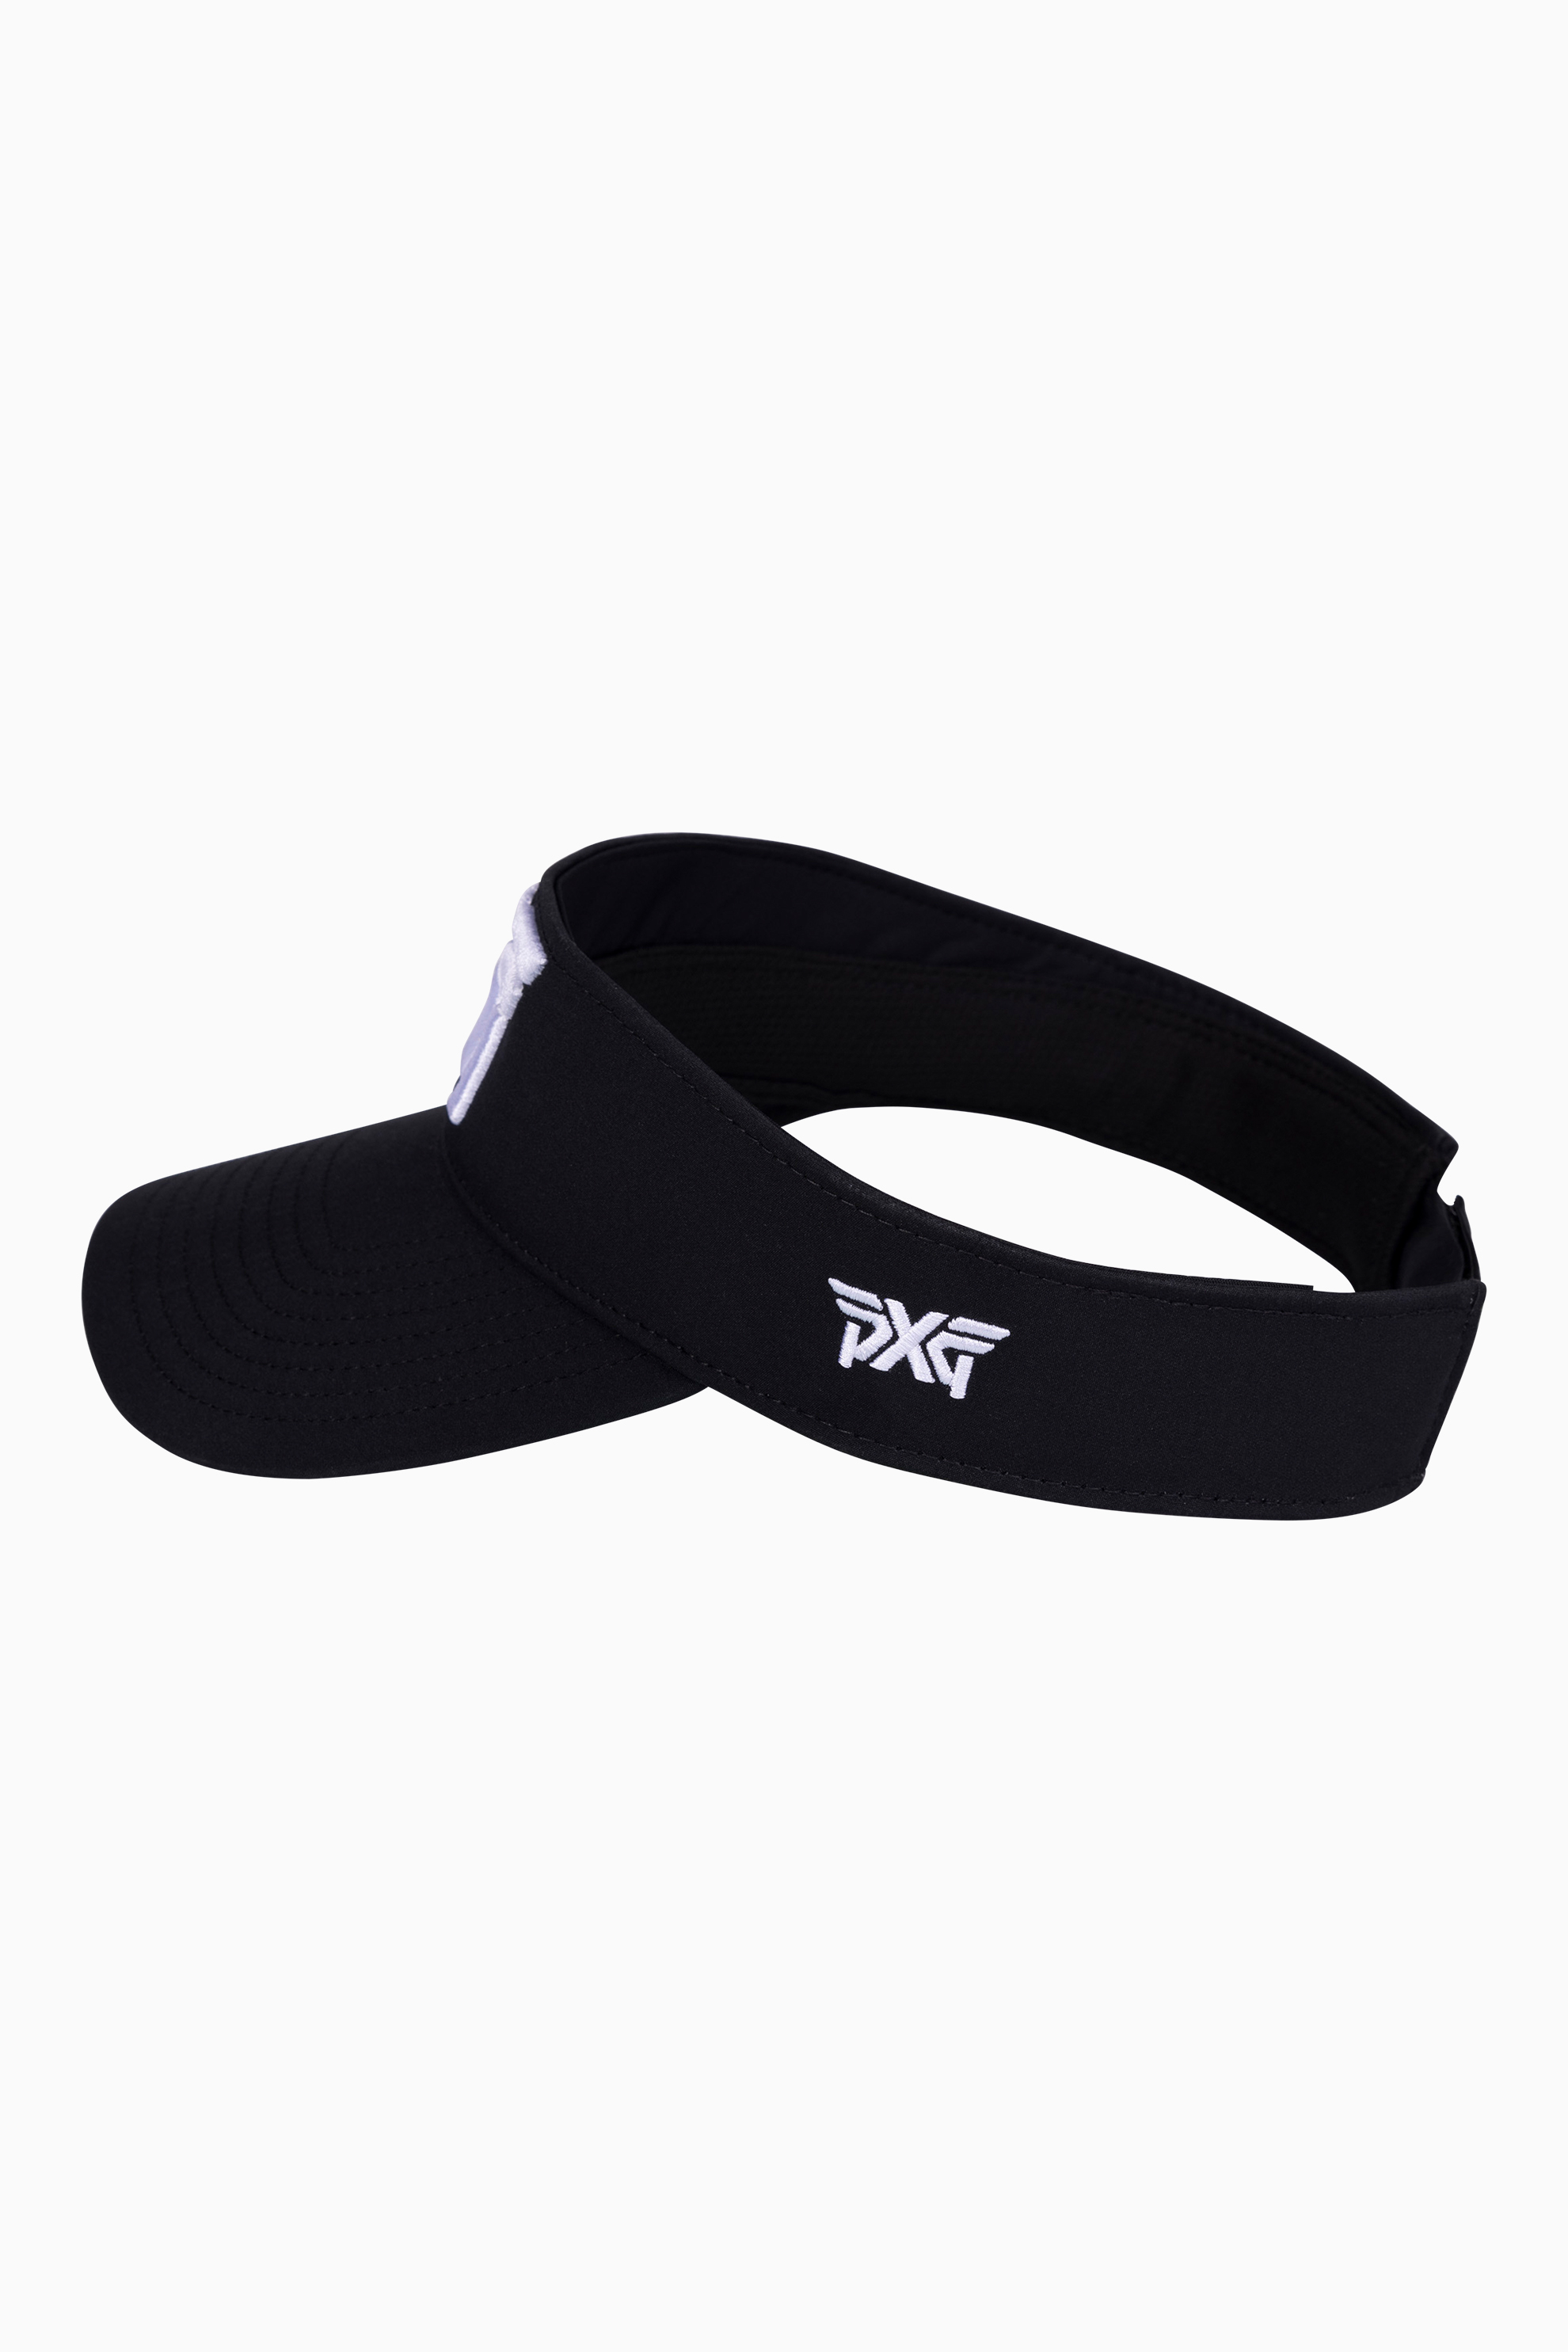 Sport Visor | PXG the Golf Accessories at Apparel, Clubs Golf Quality and Shop Highest Gear